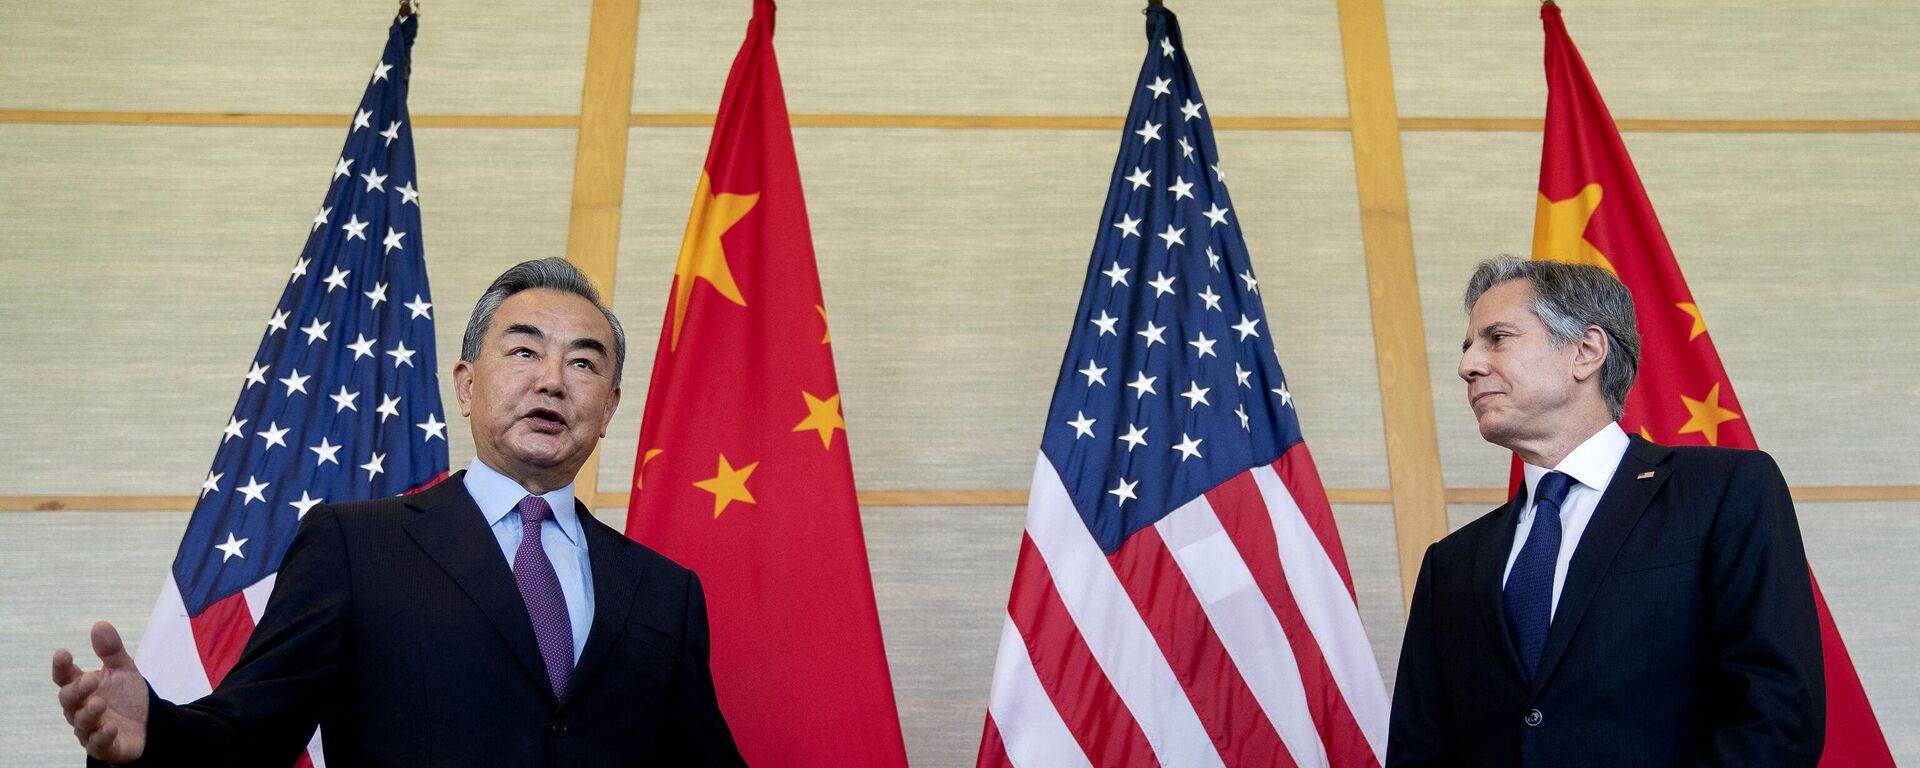 US Secretary of State Antony Blinken (R) and China's Foreign Minister Wang Yi attend a meeting in Nusa Dua on the Indonesian resort island of Bali on July 9, 2022 - Sputnik International, 1920, 13.02.2023